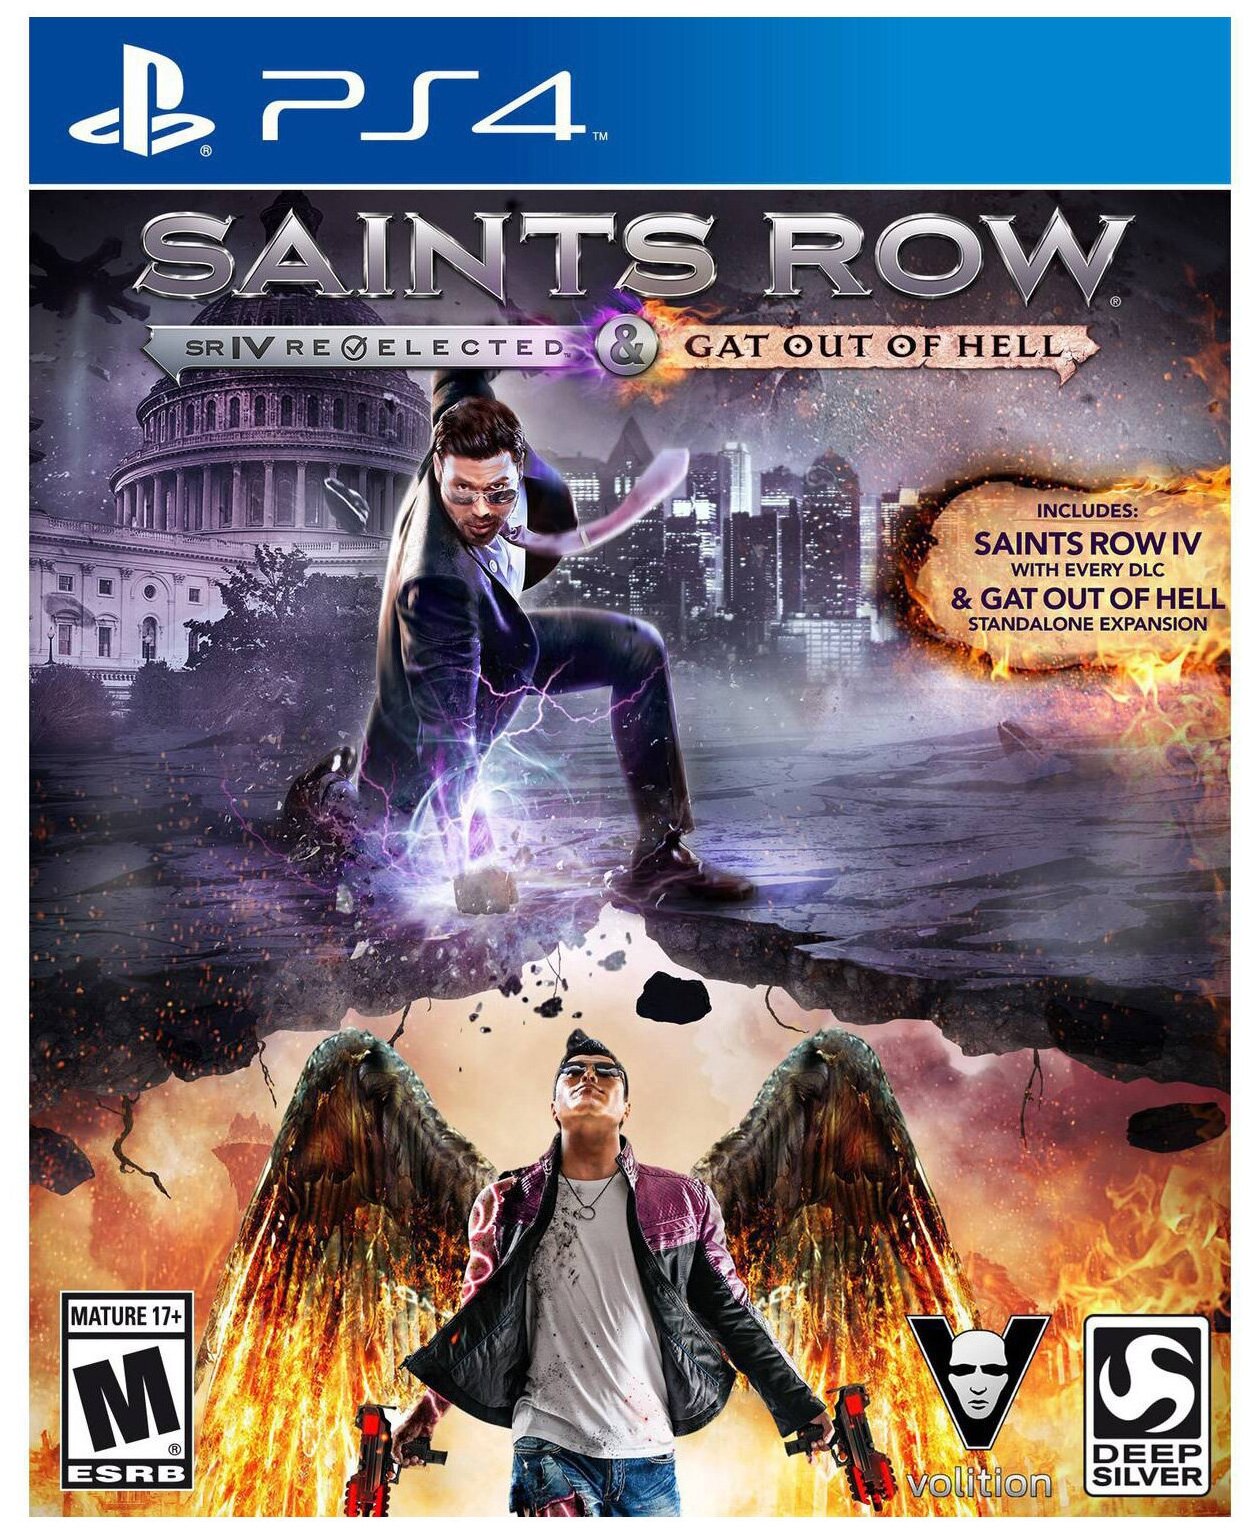 PS4 игра Deep Silver Saints Row IV: Re-elected&Gat out of Hell.FE